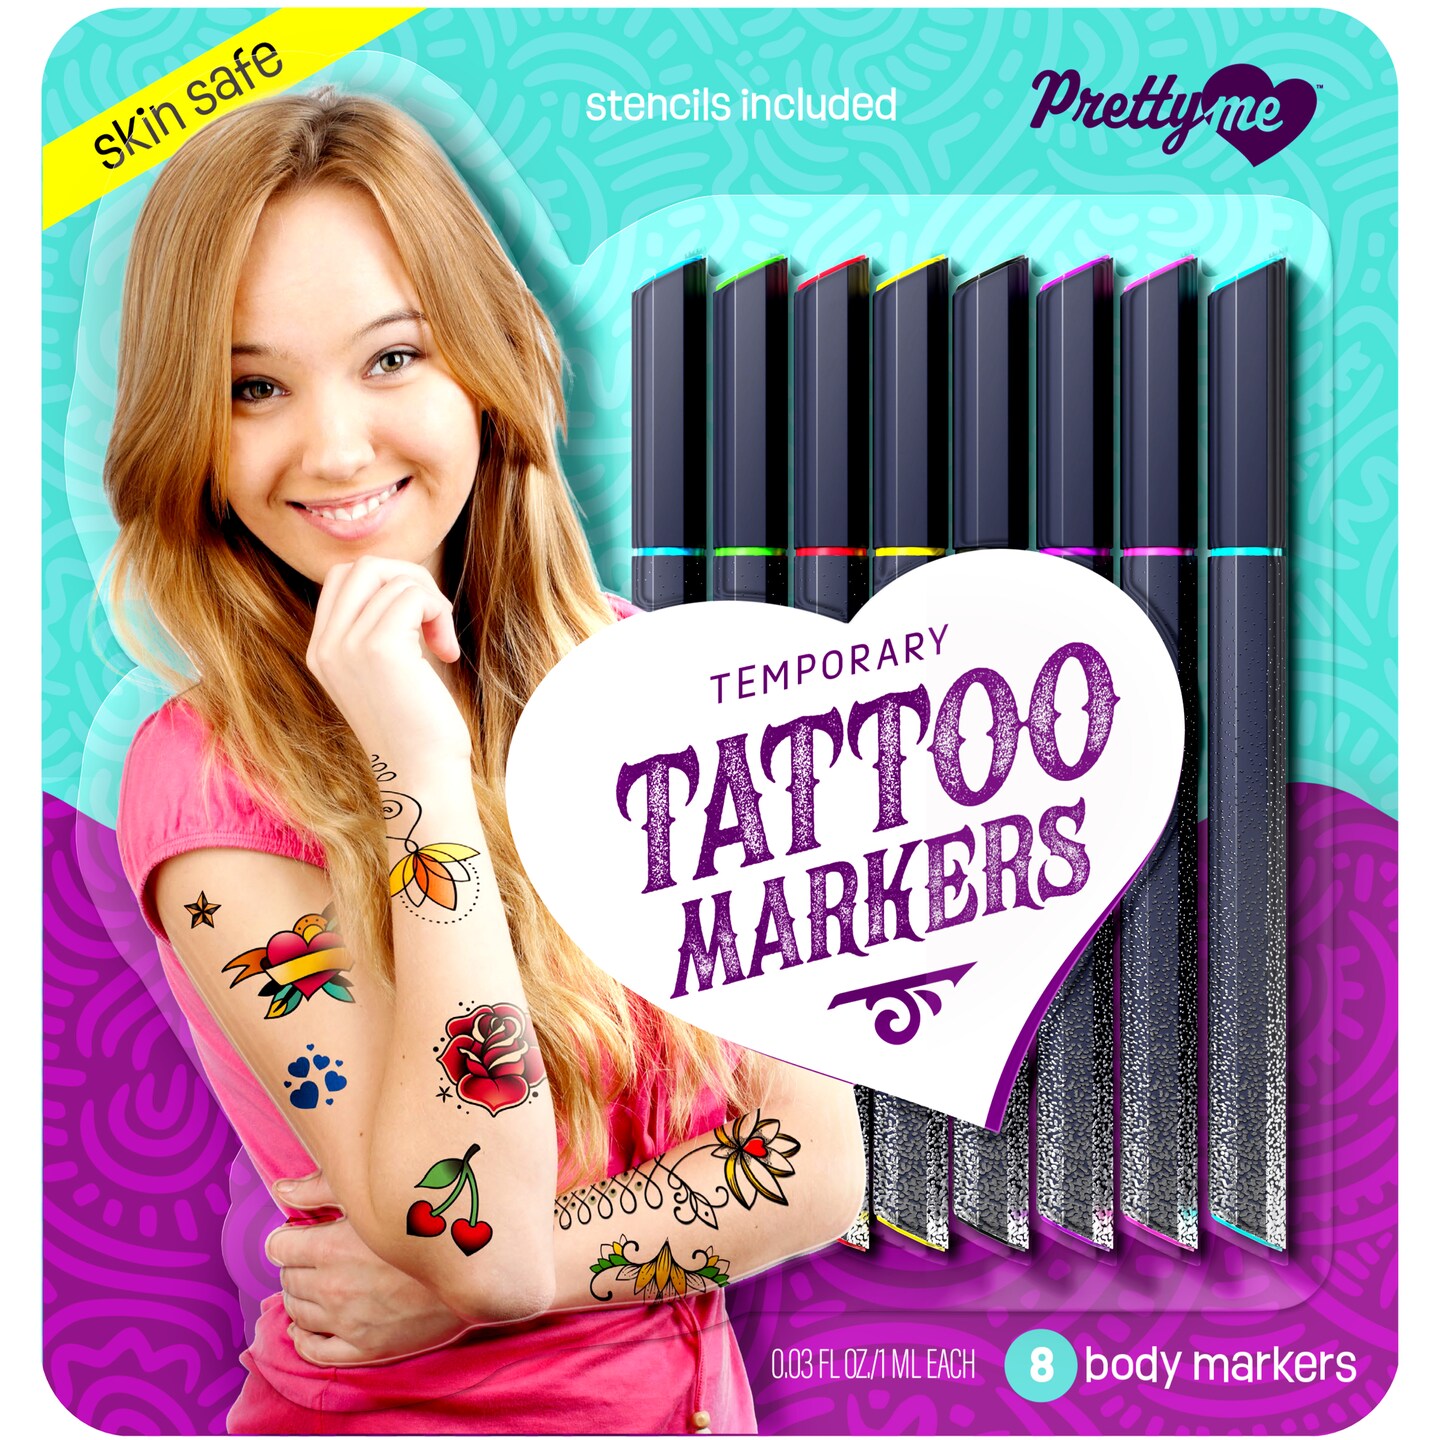 Pretty Me Temporary Tattoo Body Markers - Skin Tattoos Pen for Kids - Cool Gifts for Teen Girls - Teenage Girl Birthday Gift Ideas